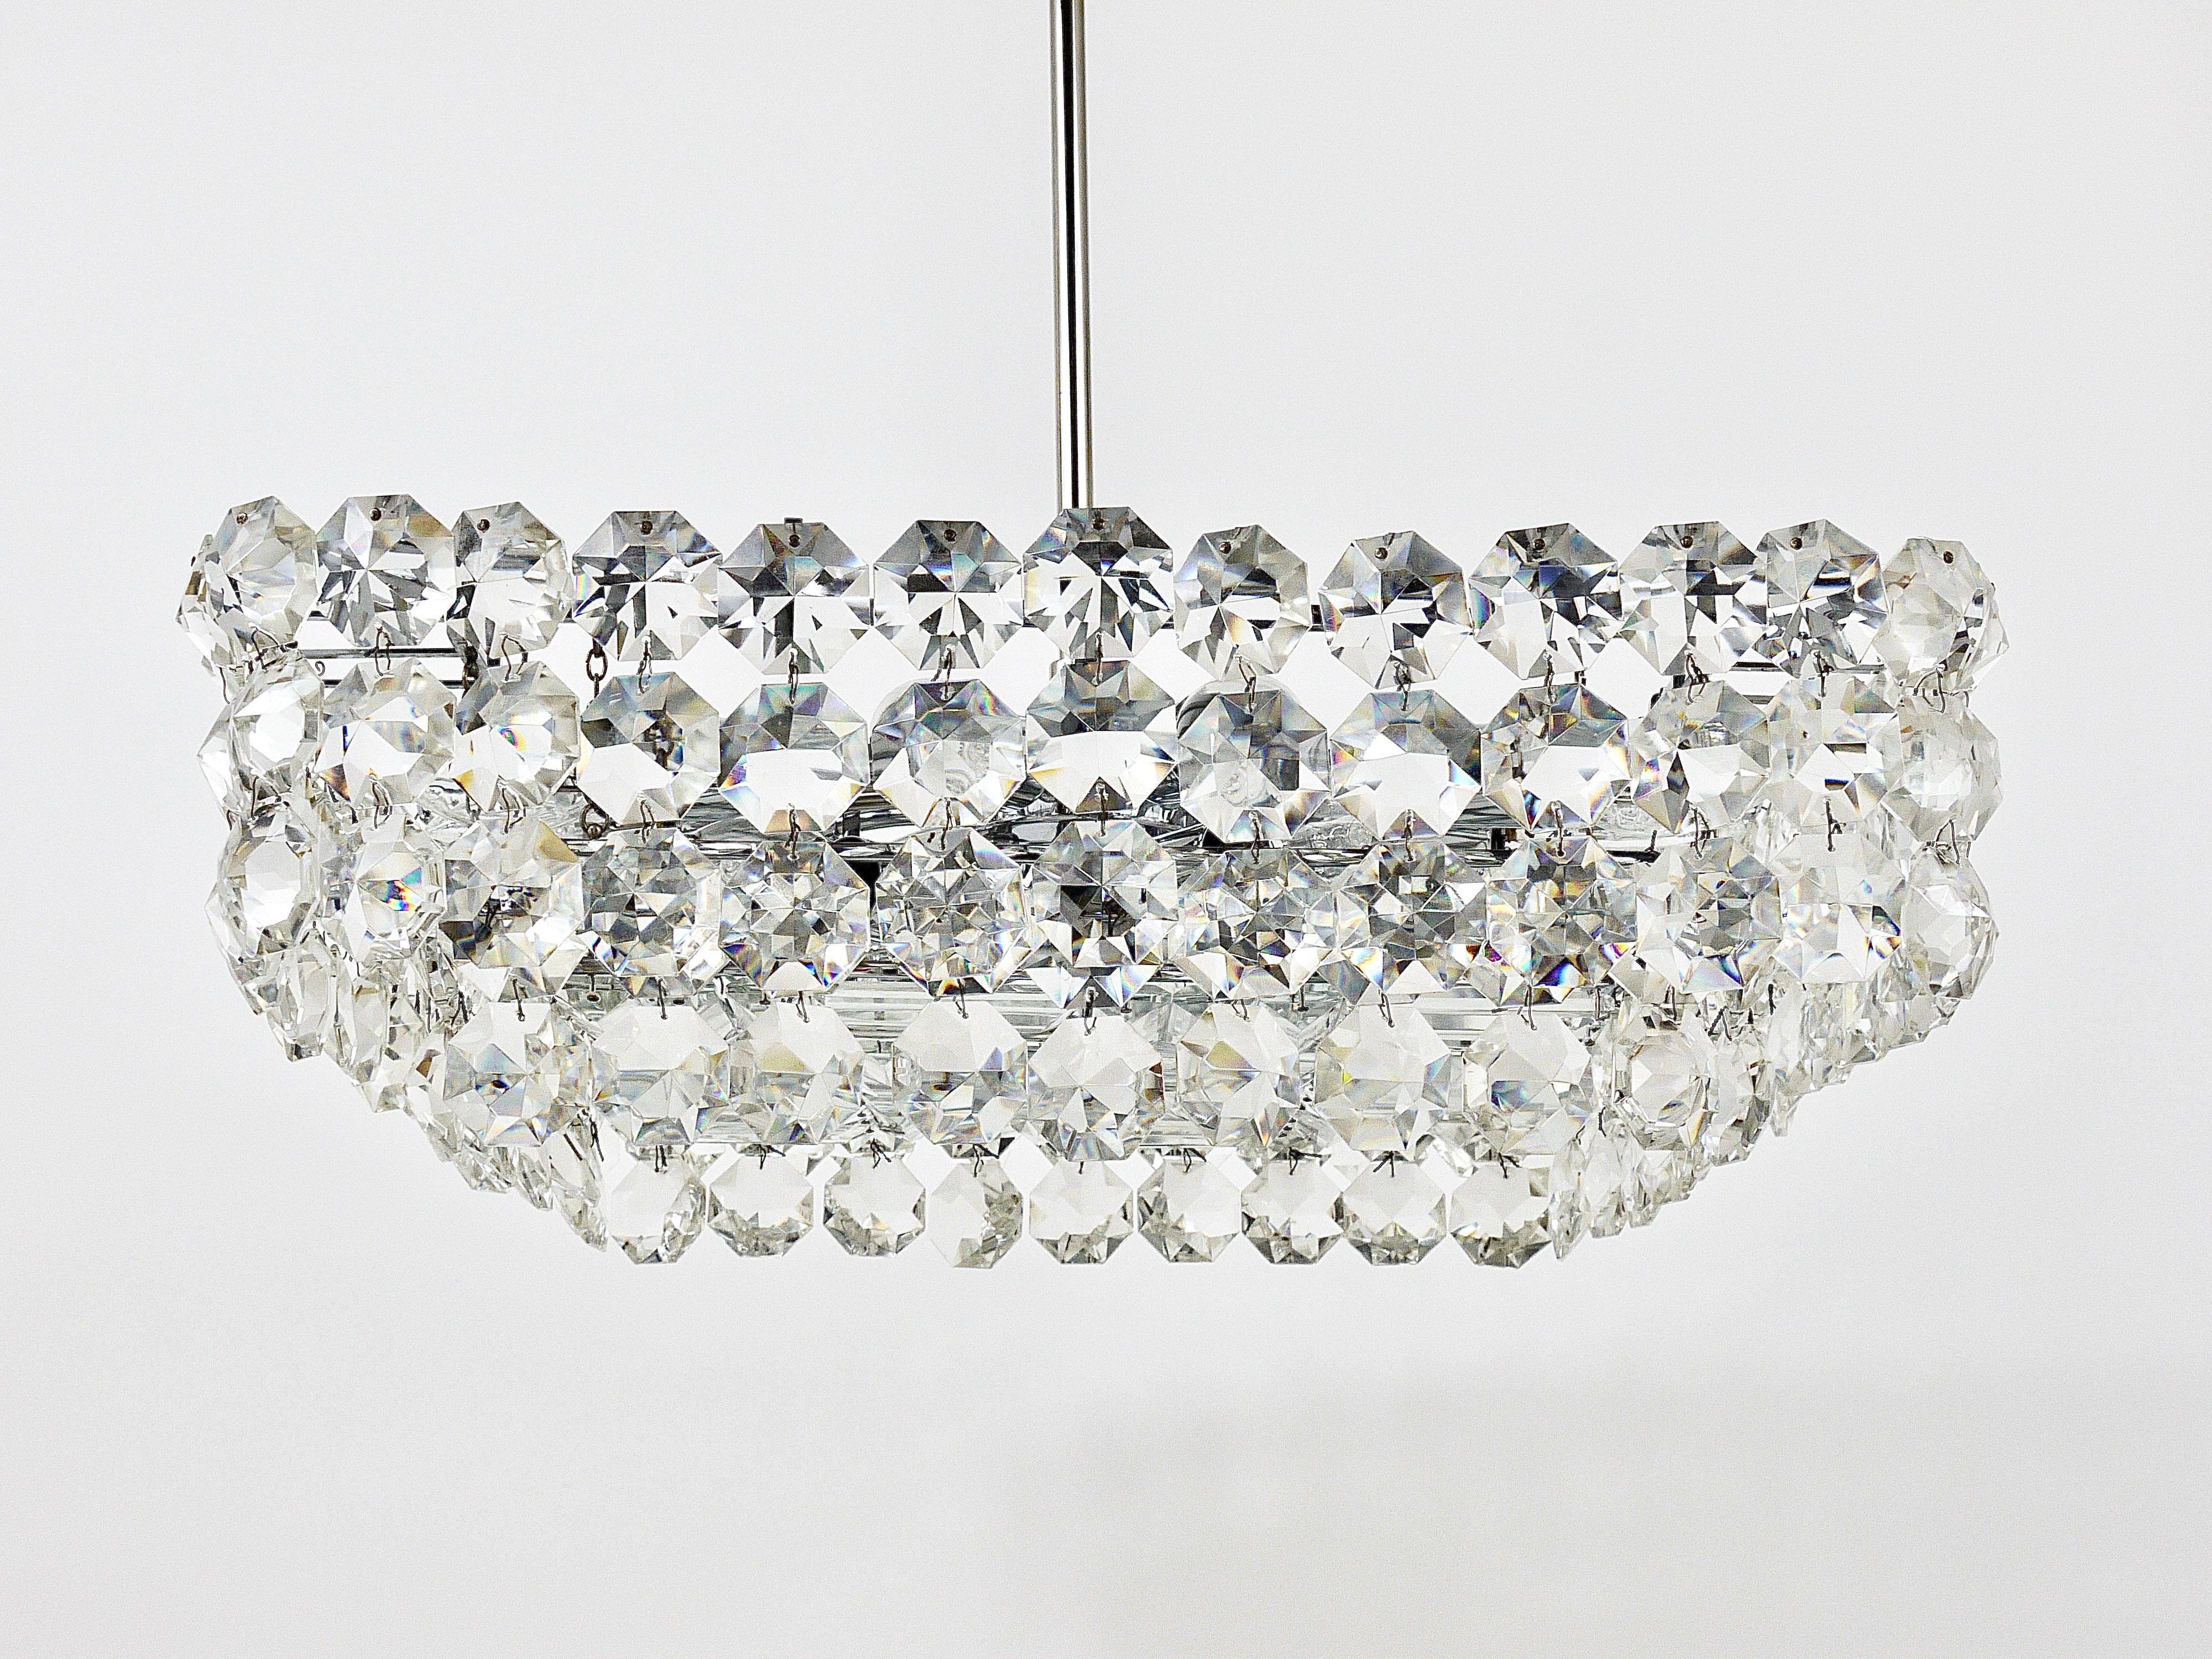 20th Century Large Square Bakalowits Chandelier with Diamond-Shaped Crystals, Austria, 1950s For Sale